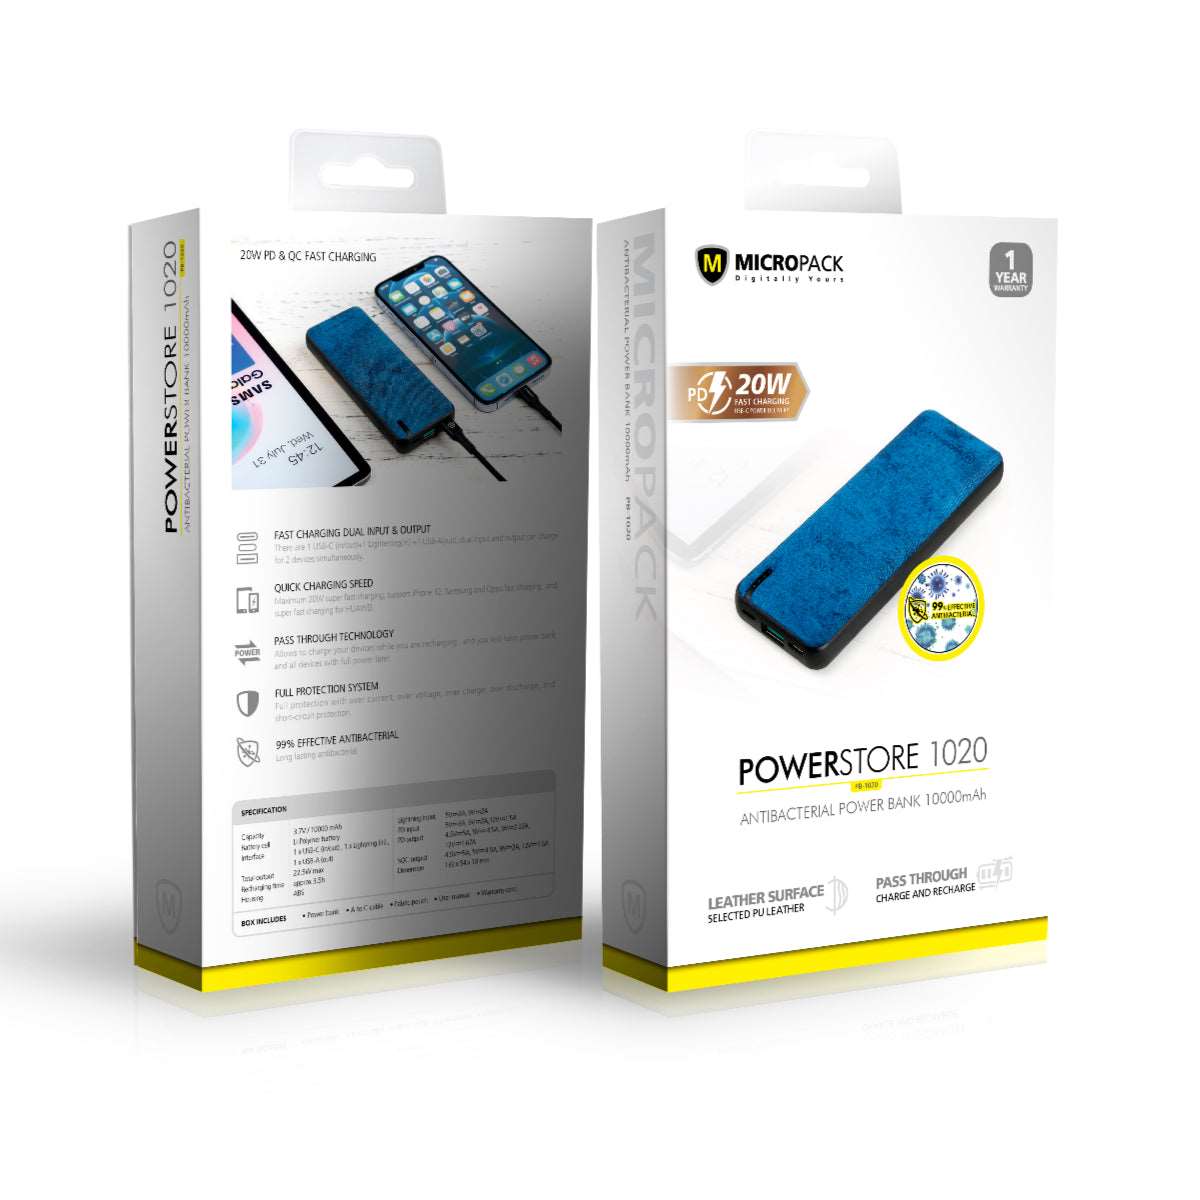 Wholesale Power Bank 10000mAh Packaging picture